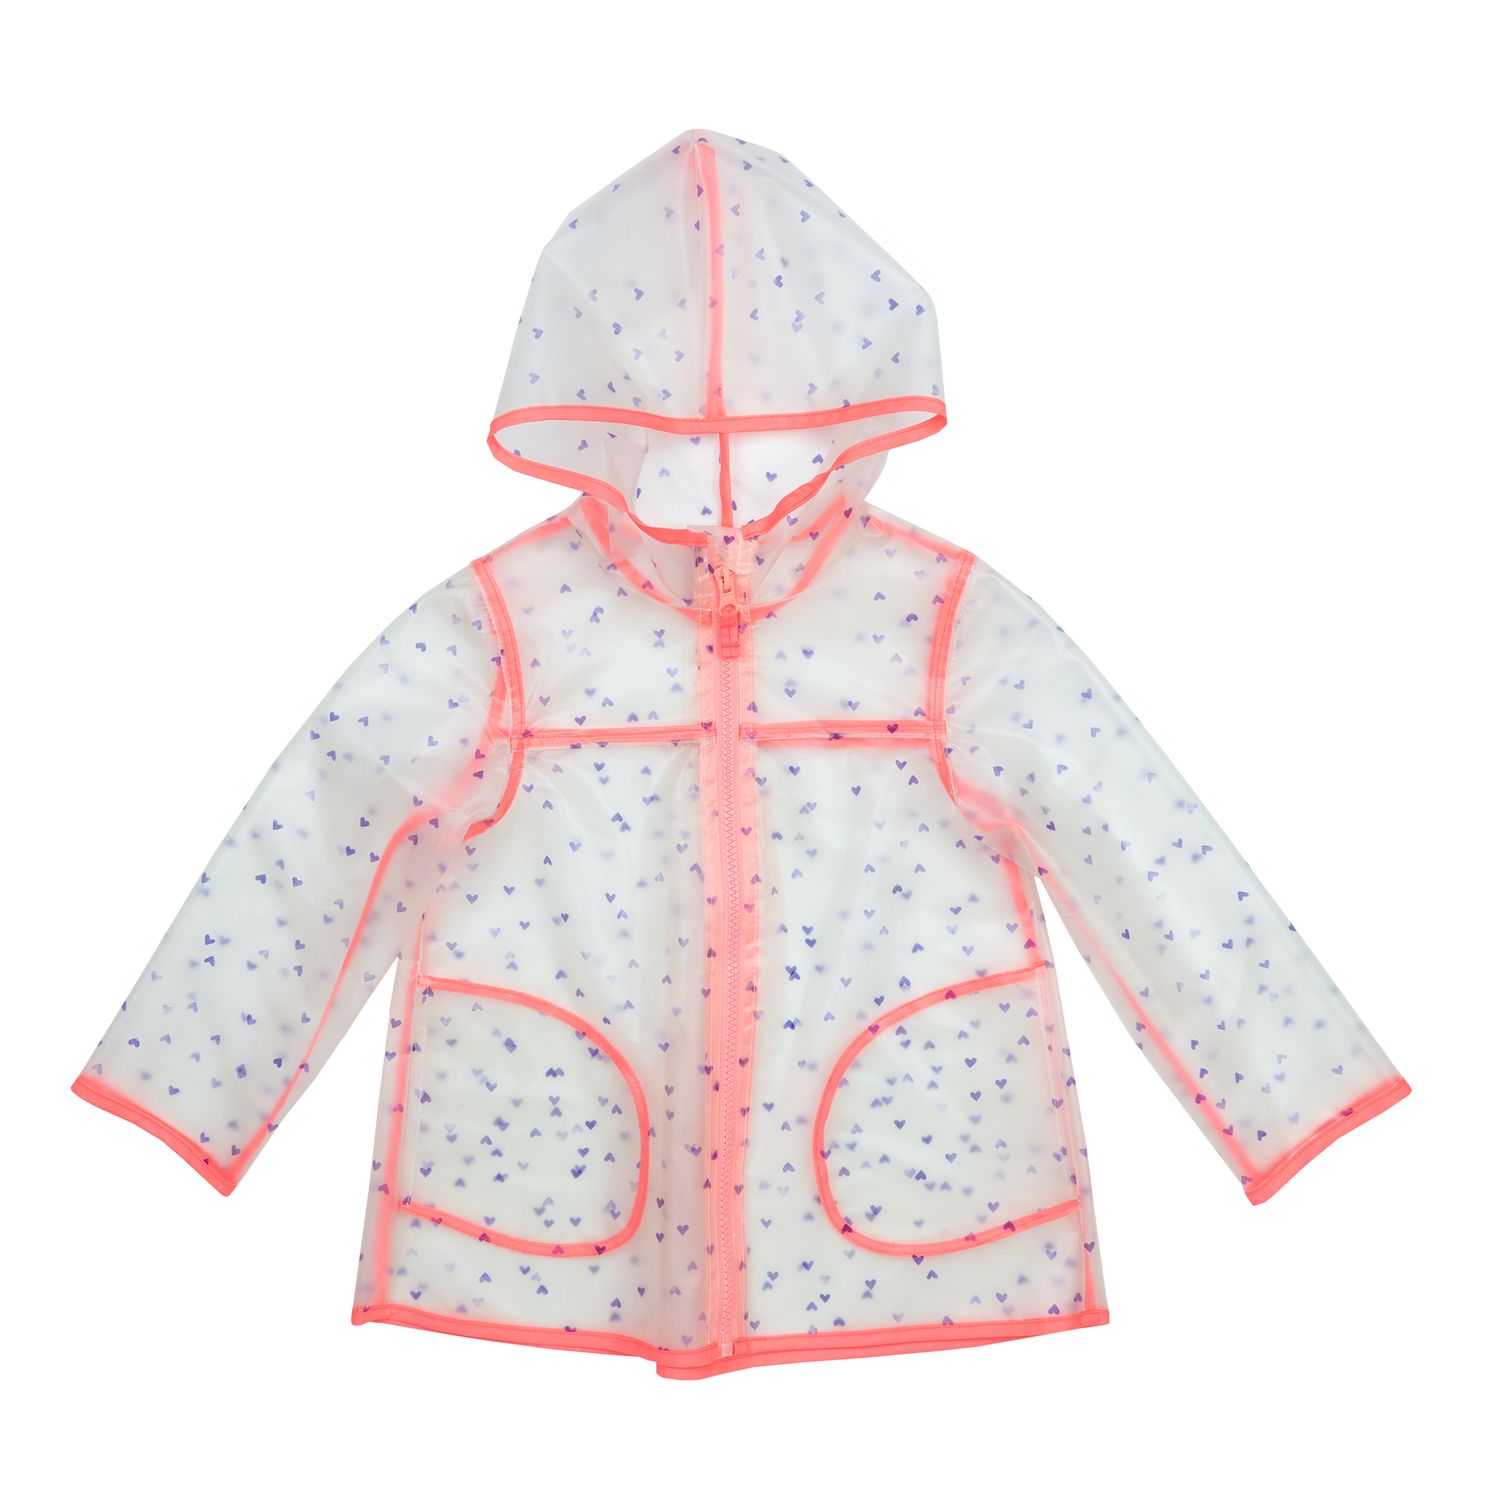 rain jacket for 1 year old